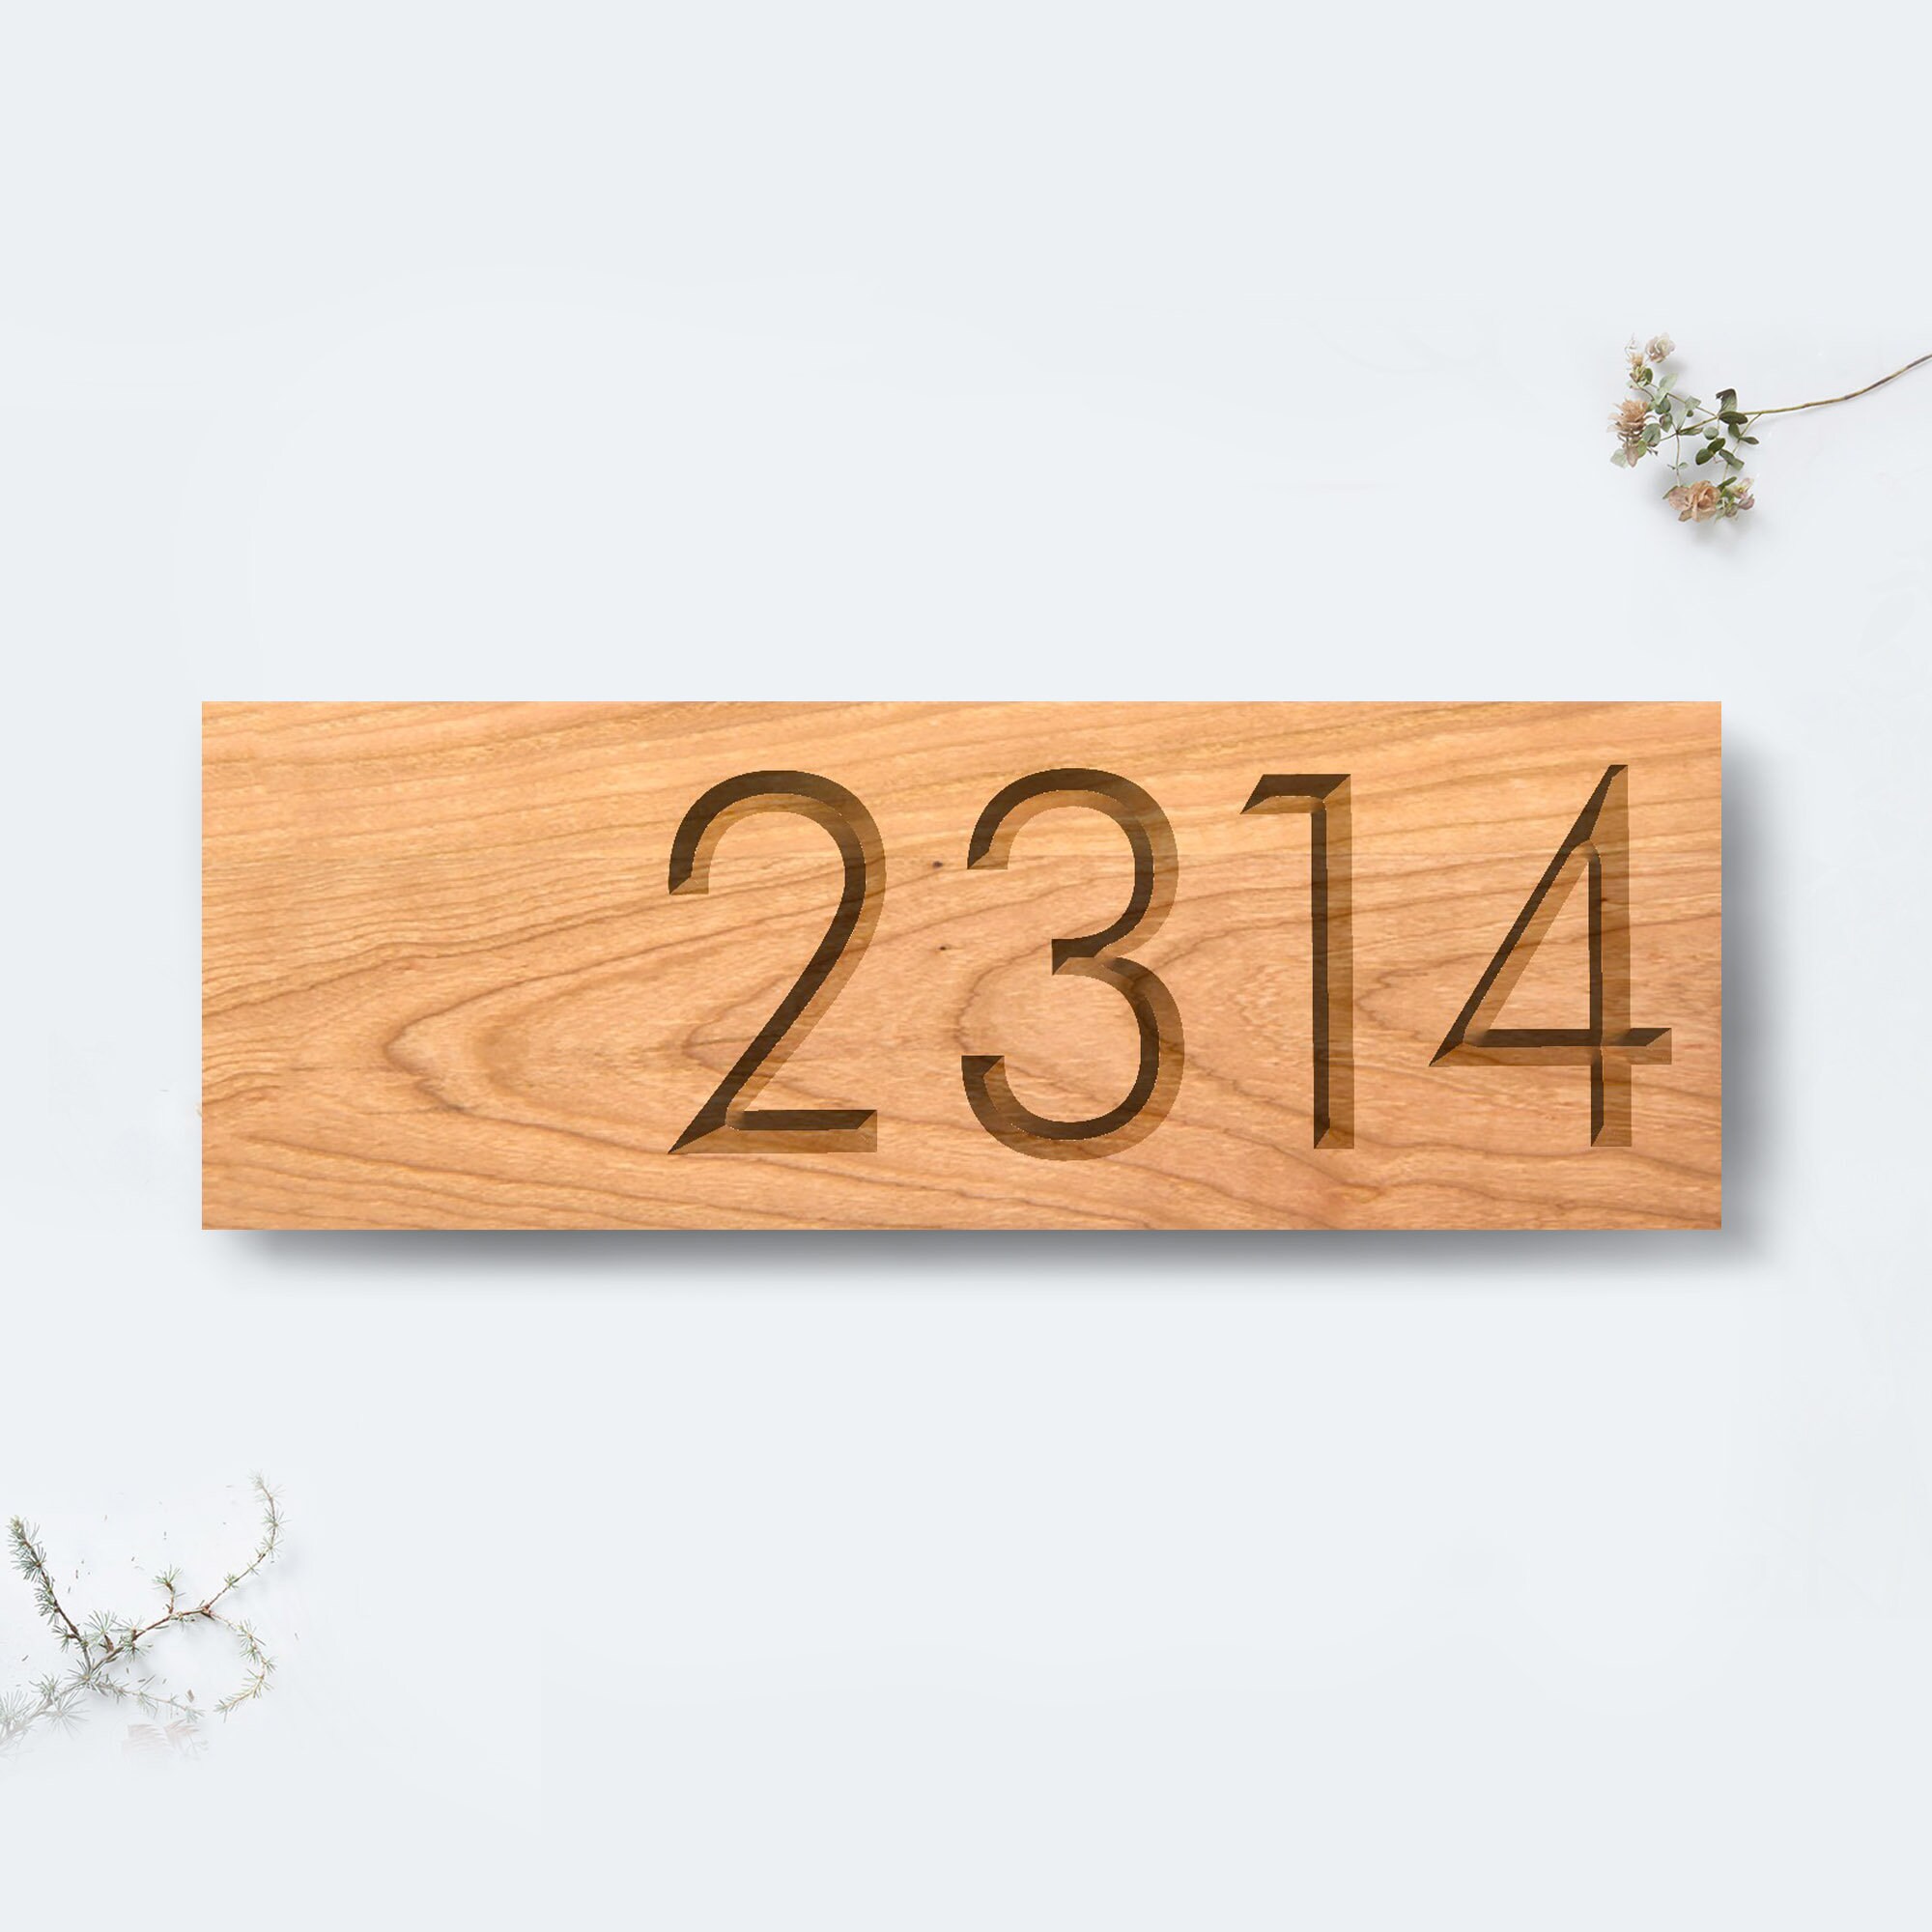 Carved Wood Address Plaque with Big House Numbers